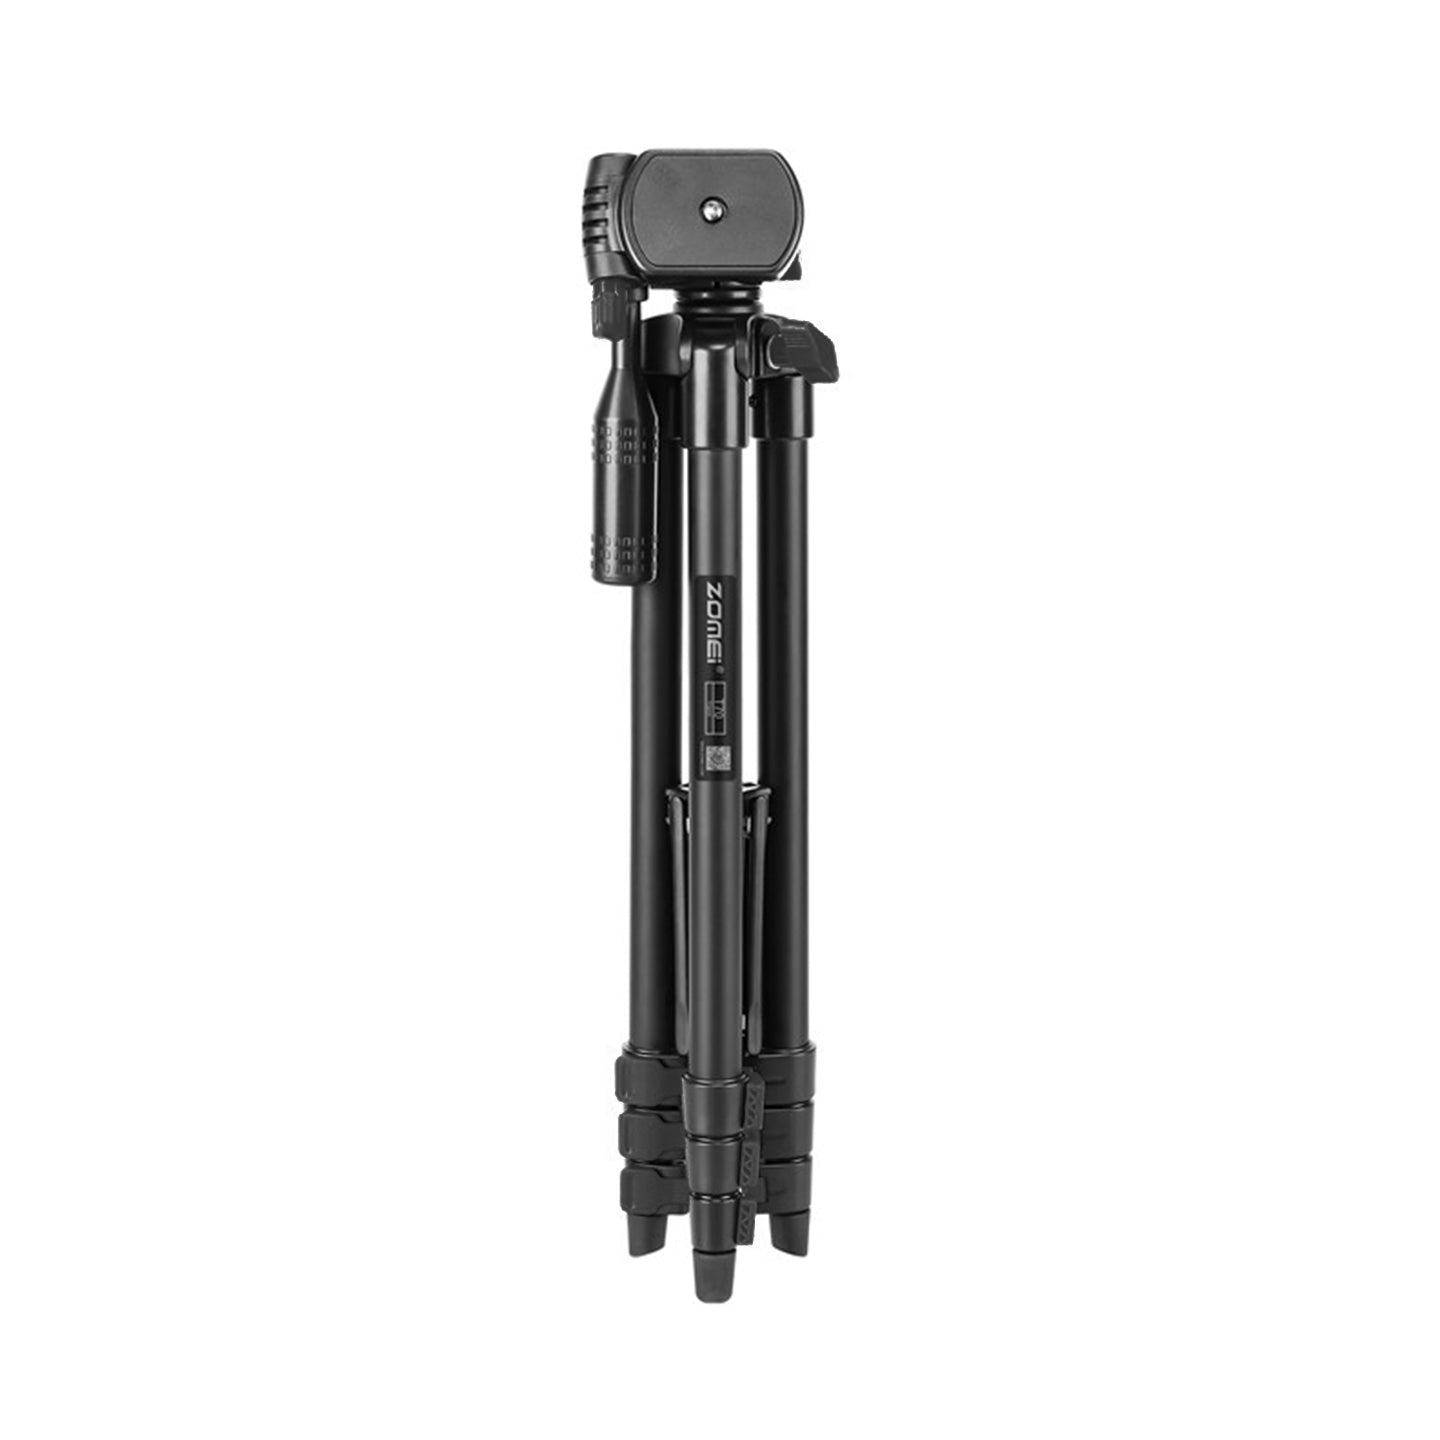 Zomei T70 Tripod Portable Extendable Stand Quick Release Mount with Arm, 4kg Load Capacity, and Travel Bag Case for Livestreaming, Vlogging, Photography